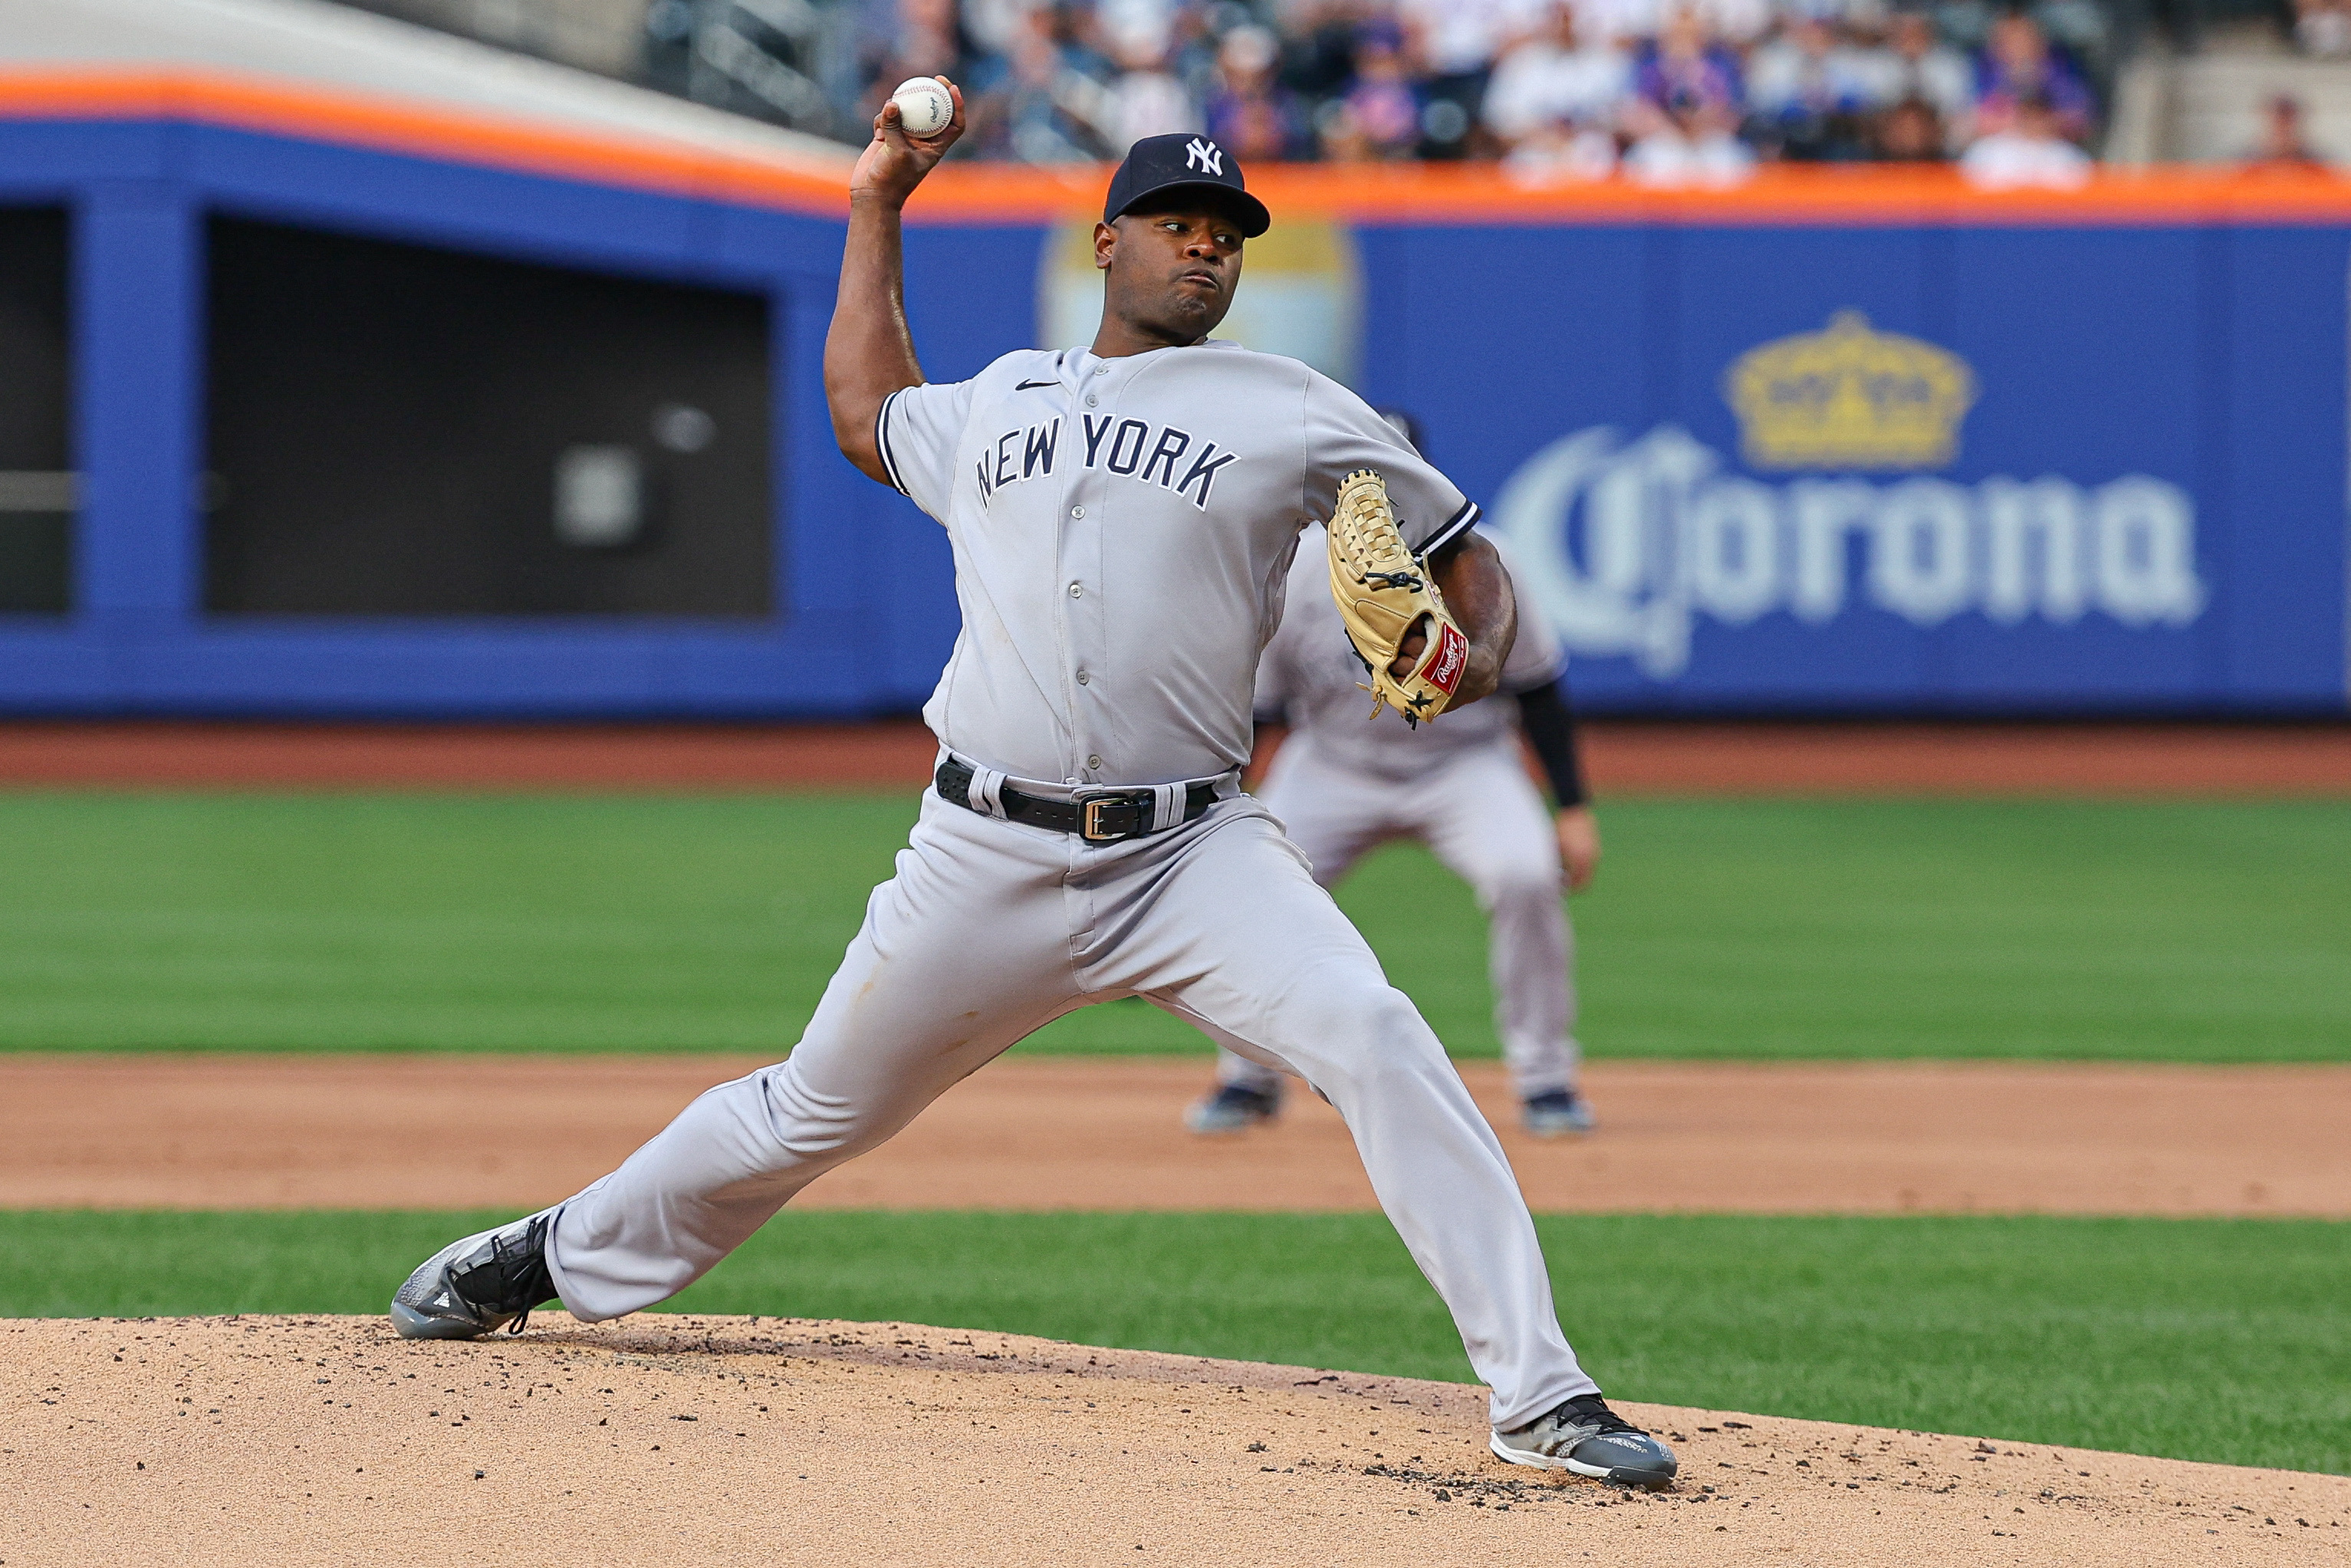 Yankees come back to beat Mets in season's first meeting